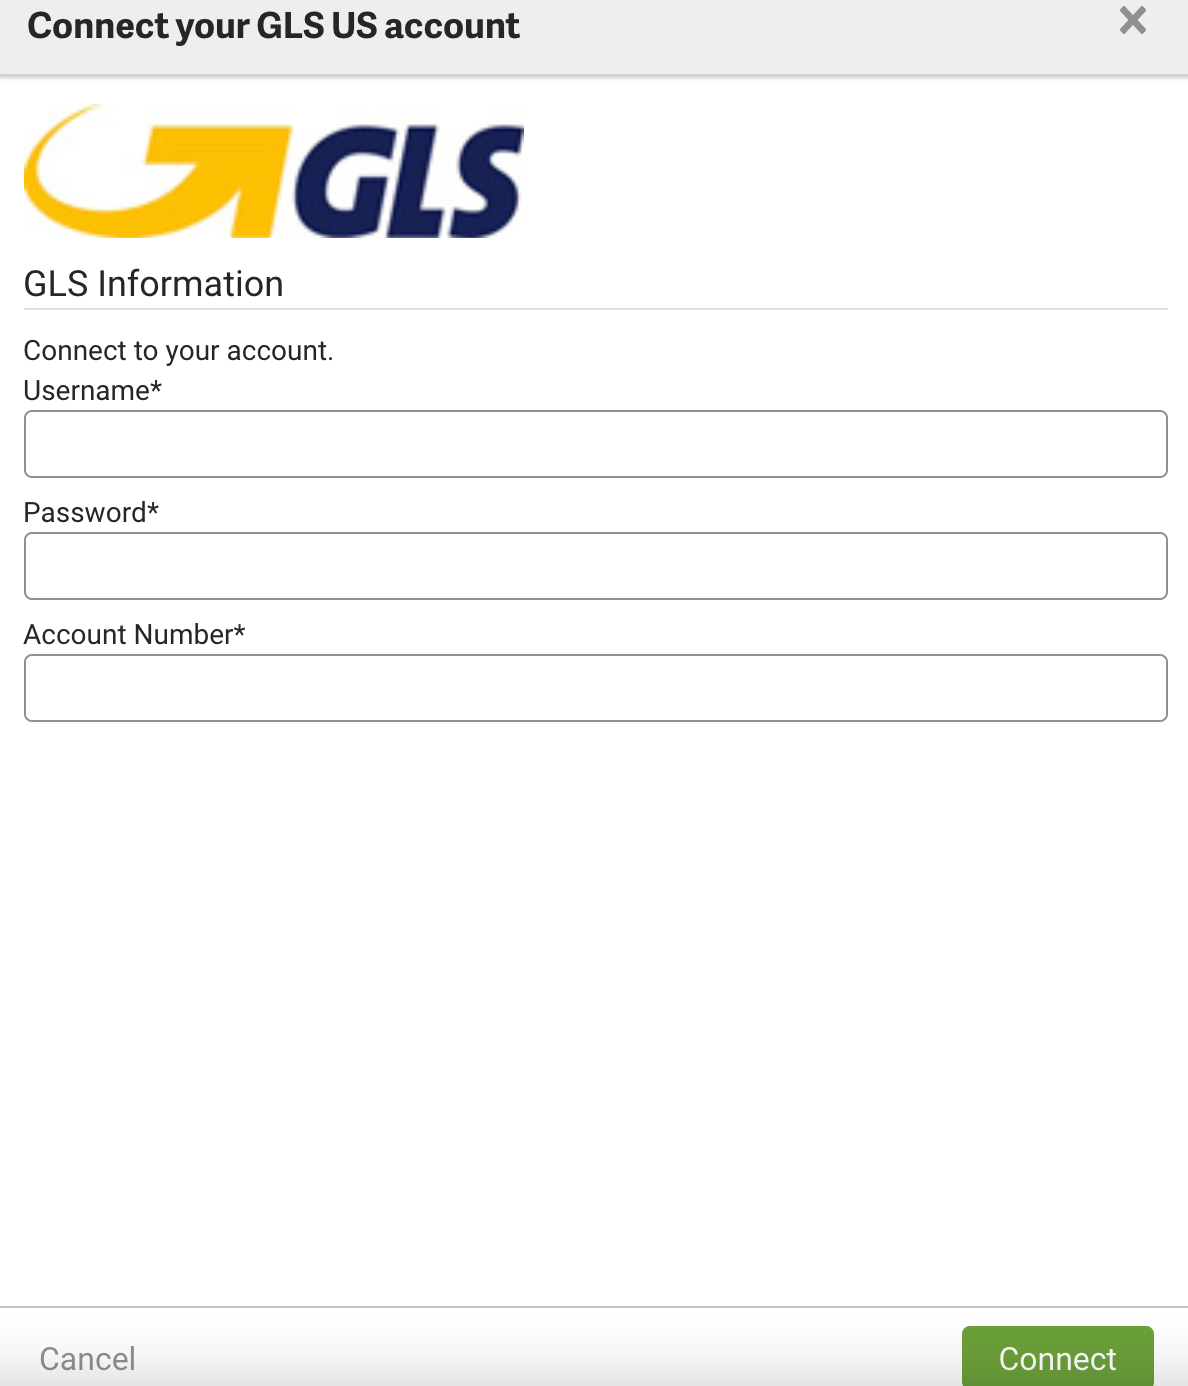 GLS connection pop-up screen displaying username, password and account number field.